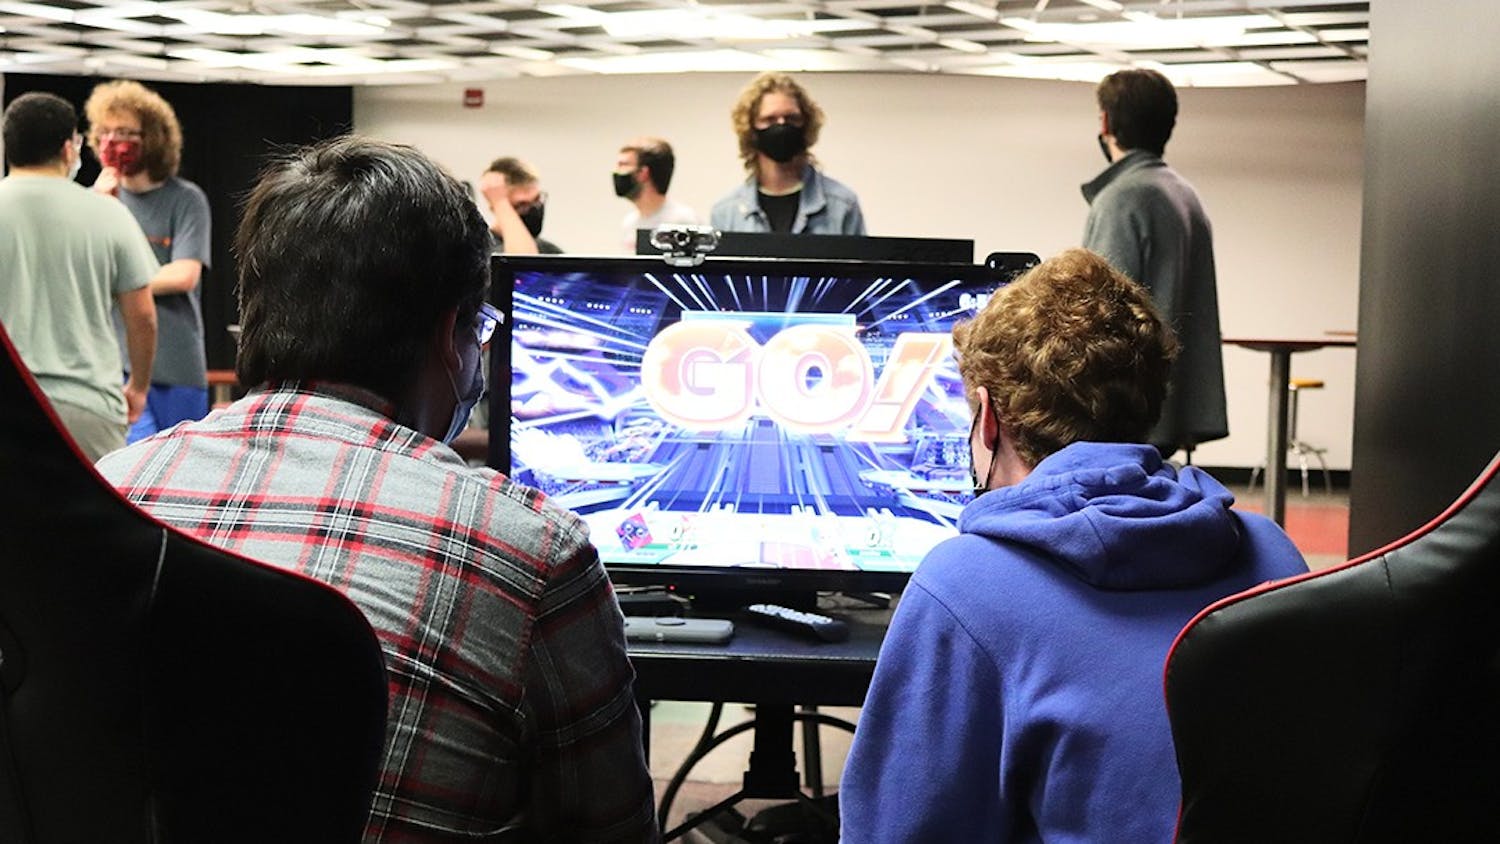 The USC Smash Club hosts weekly tournaments, where members play Super Smash Bros. Ultimate on the Nintendo Switch. Members bring their own televisions and game consoles to play matches on, and members of the audience commentate the matches.